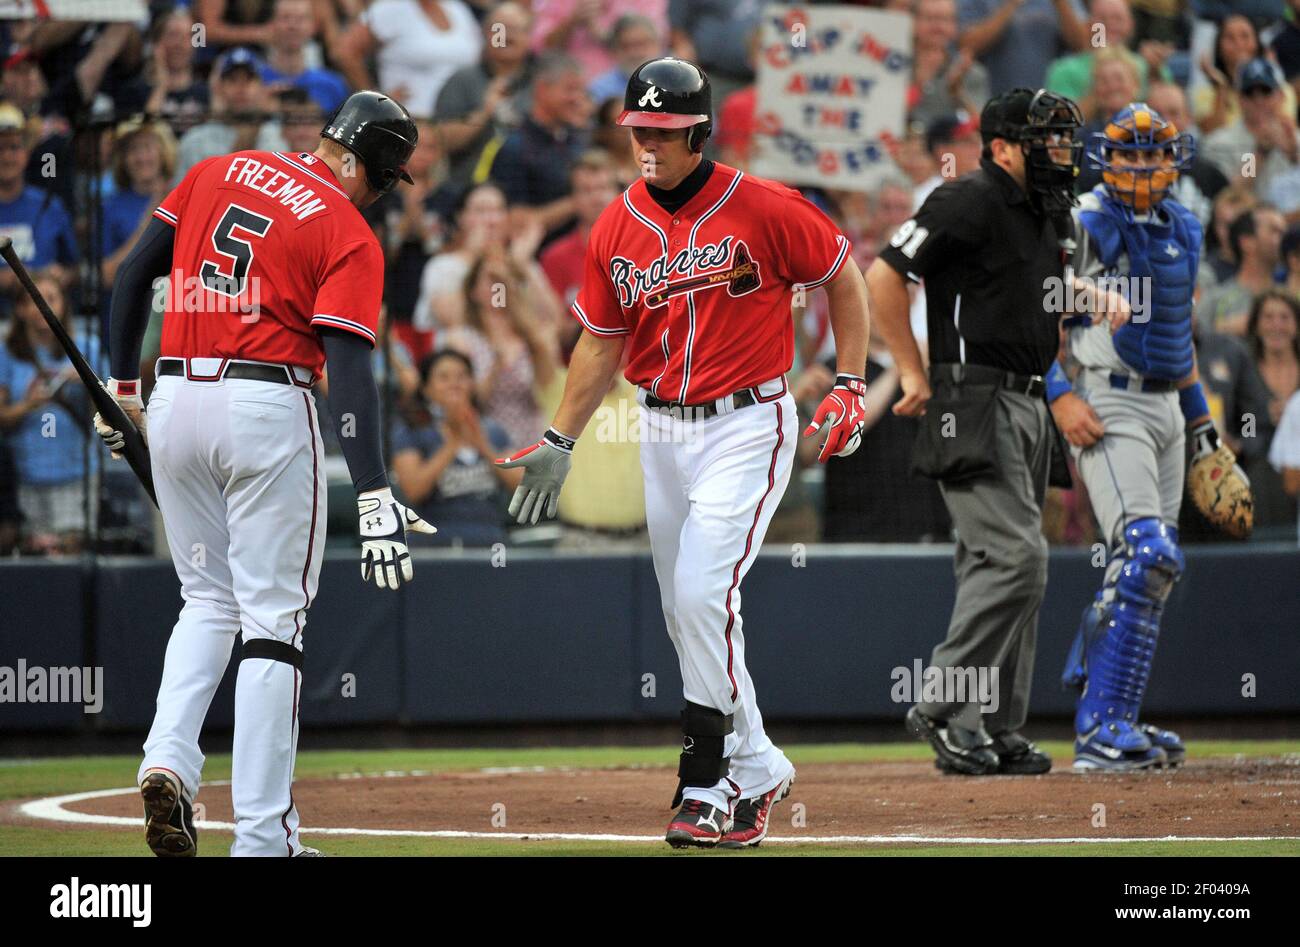 The Atlanta Braves' Chipper Jones is congratulated by teammate Freddie  Freeman (5) after his solo home run in the second inning against the Los  Angeles Dodgers at Turner Field in Atlanta, Georgia